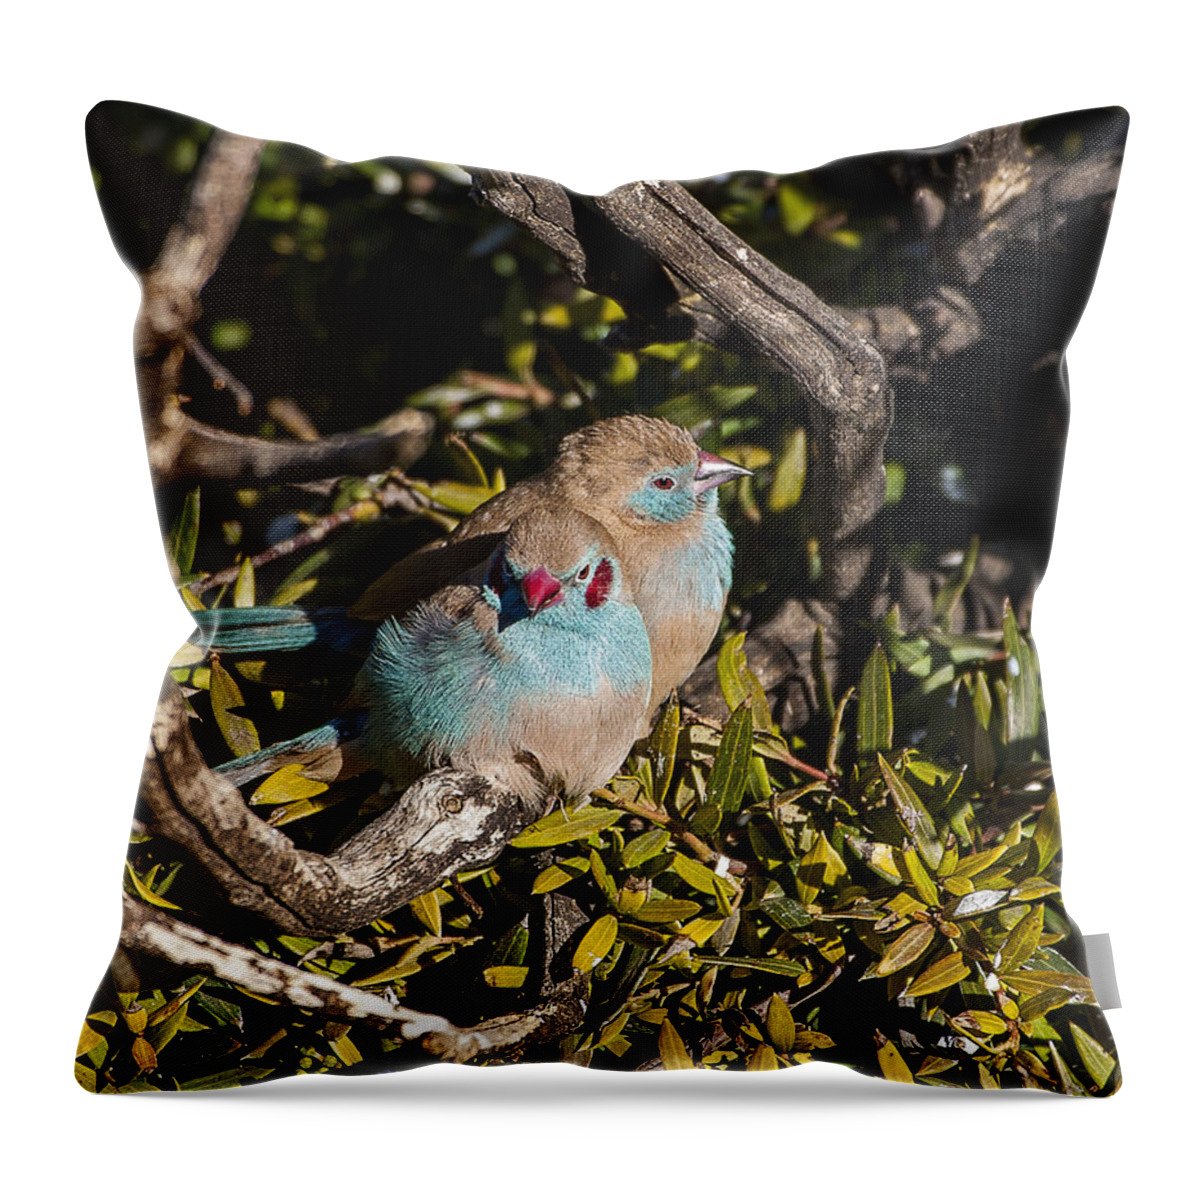 Australia Throw Pillow featuring the photograph Red Cheeked Cordon Blue Finches by Steven Ralser